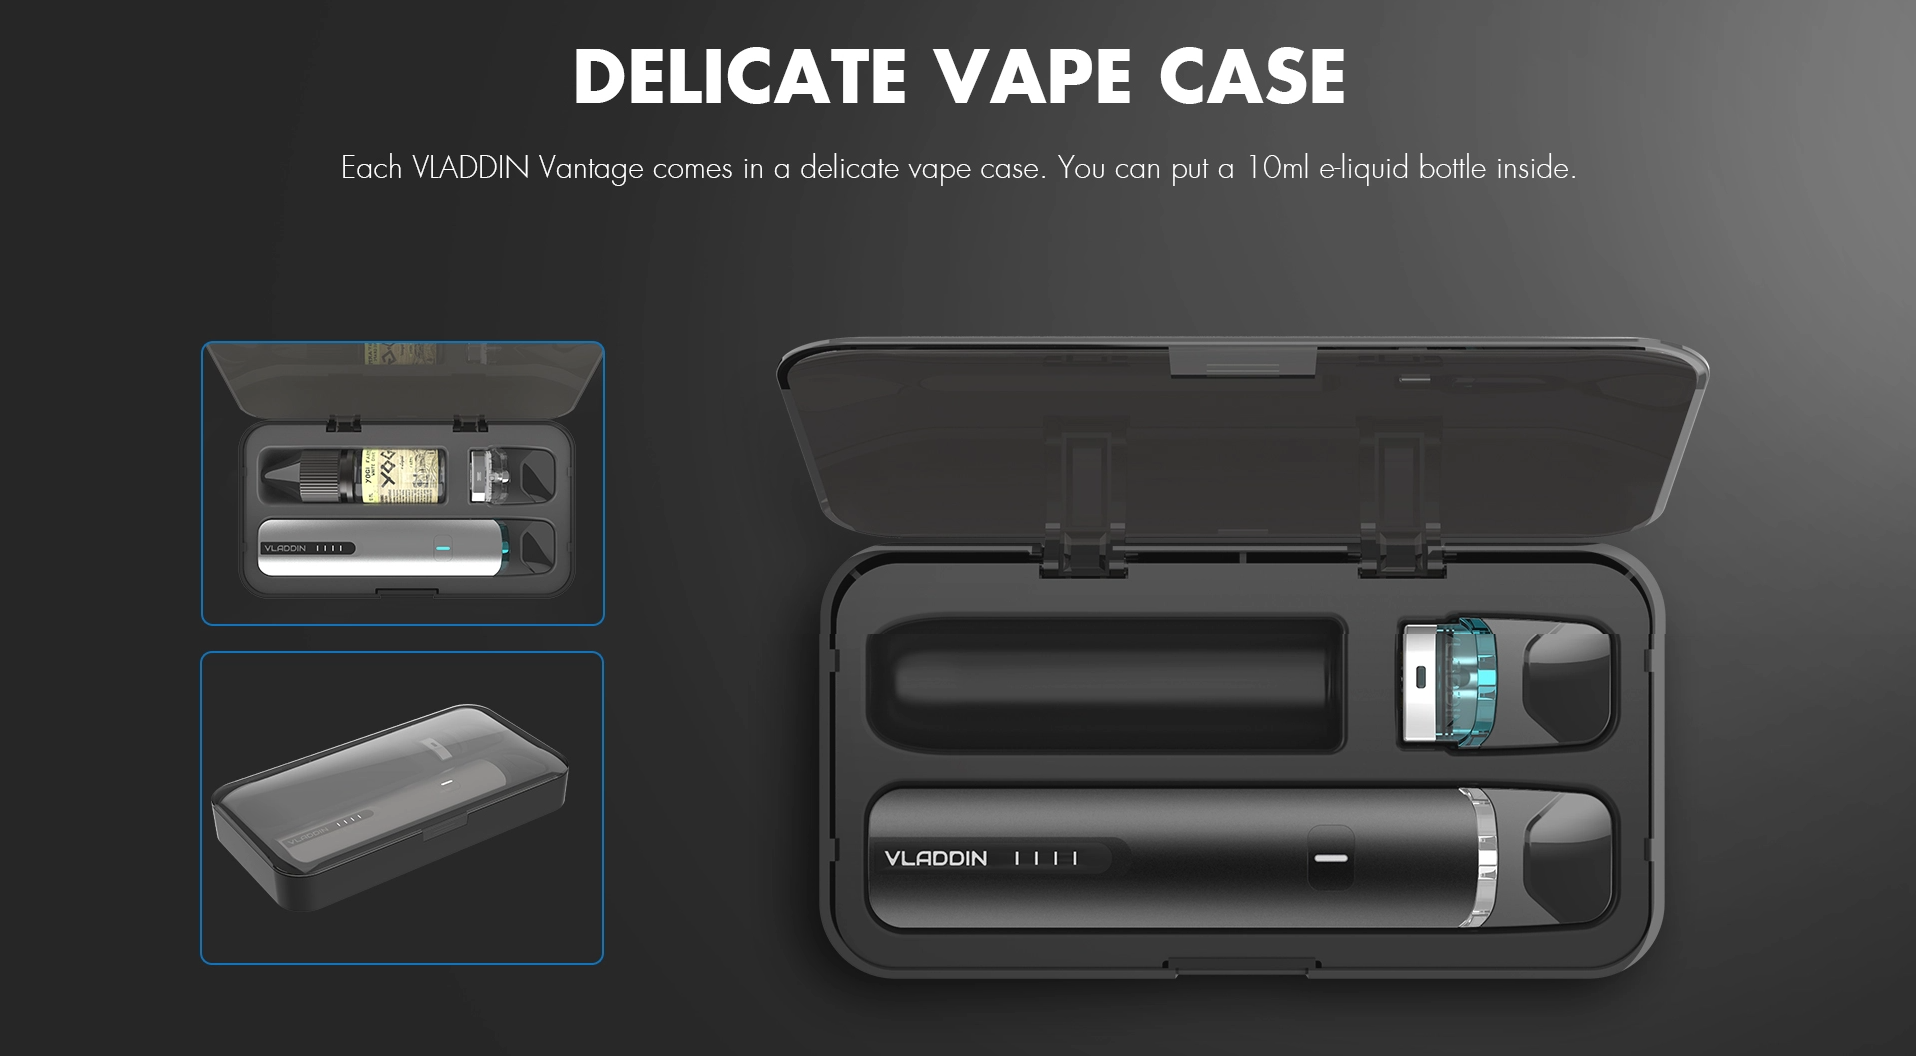 A black vape kit and carrying case against a black background.